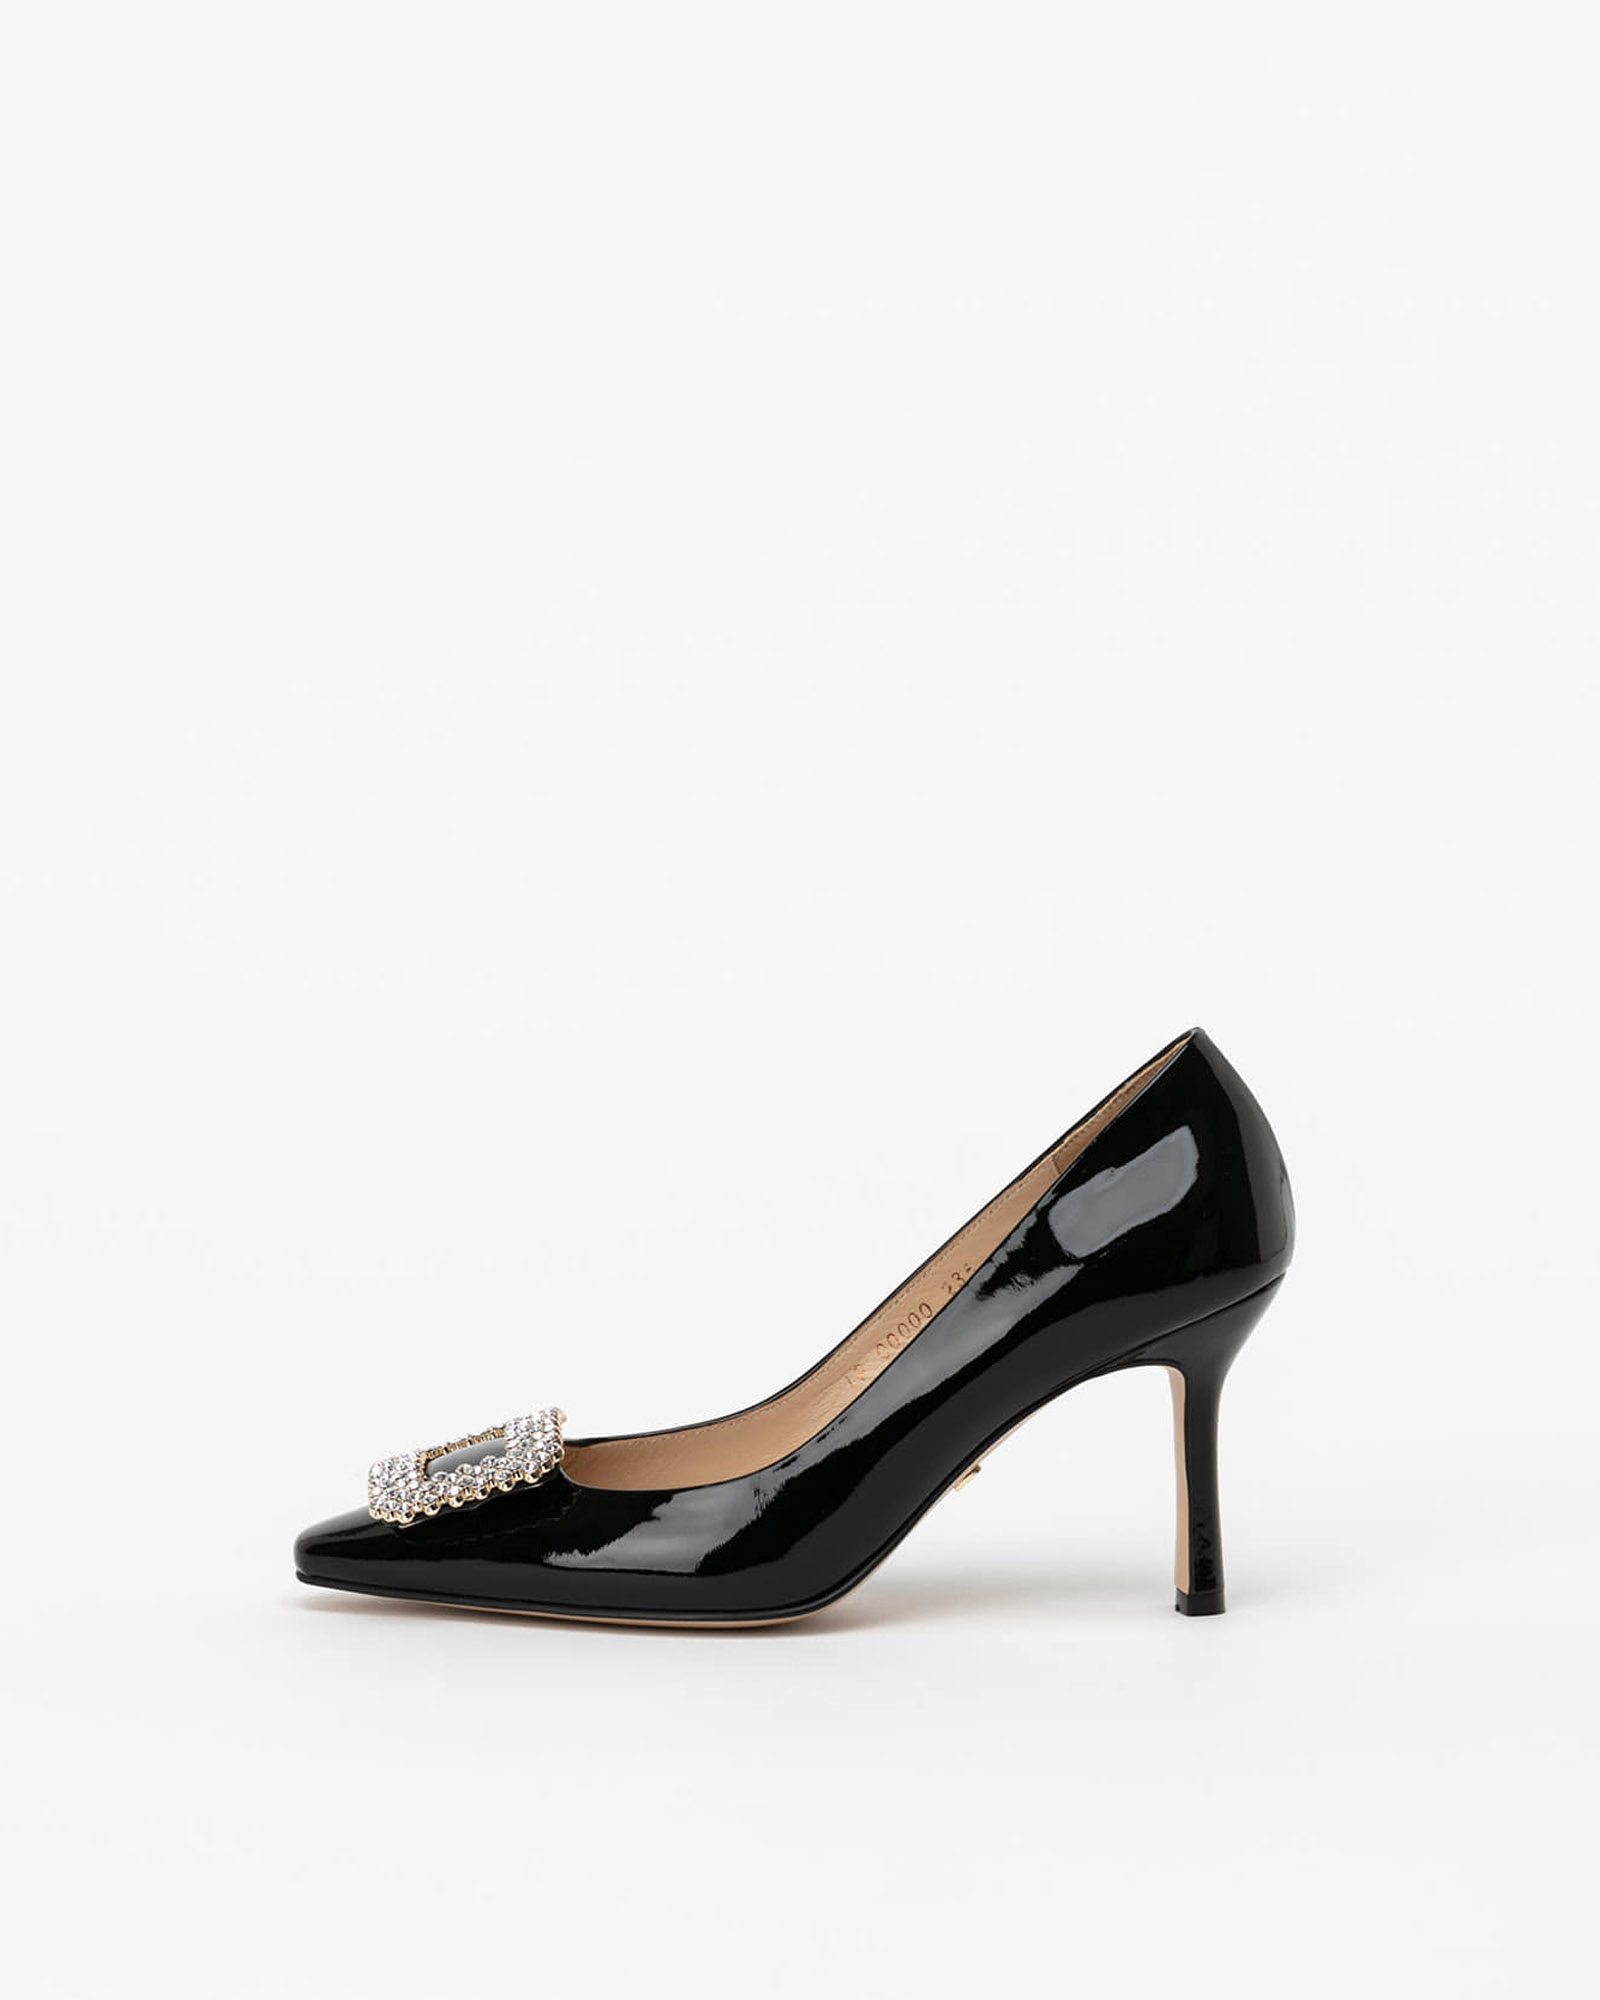 Squaletto Embellished Stiletto Pumps in Black Patent